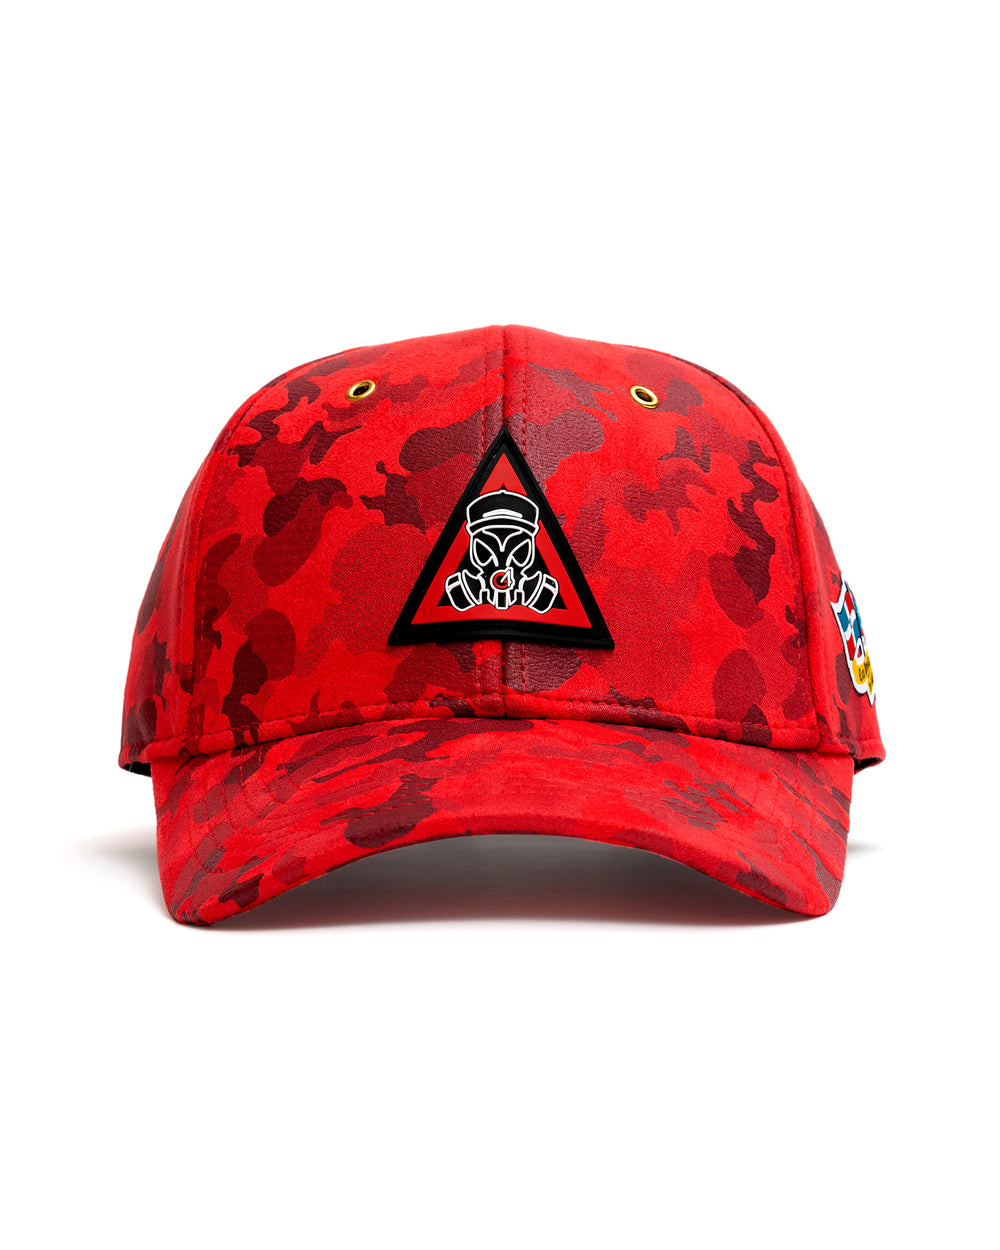 REAL G x TRI RED Camo Hat